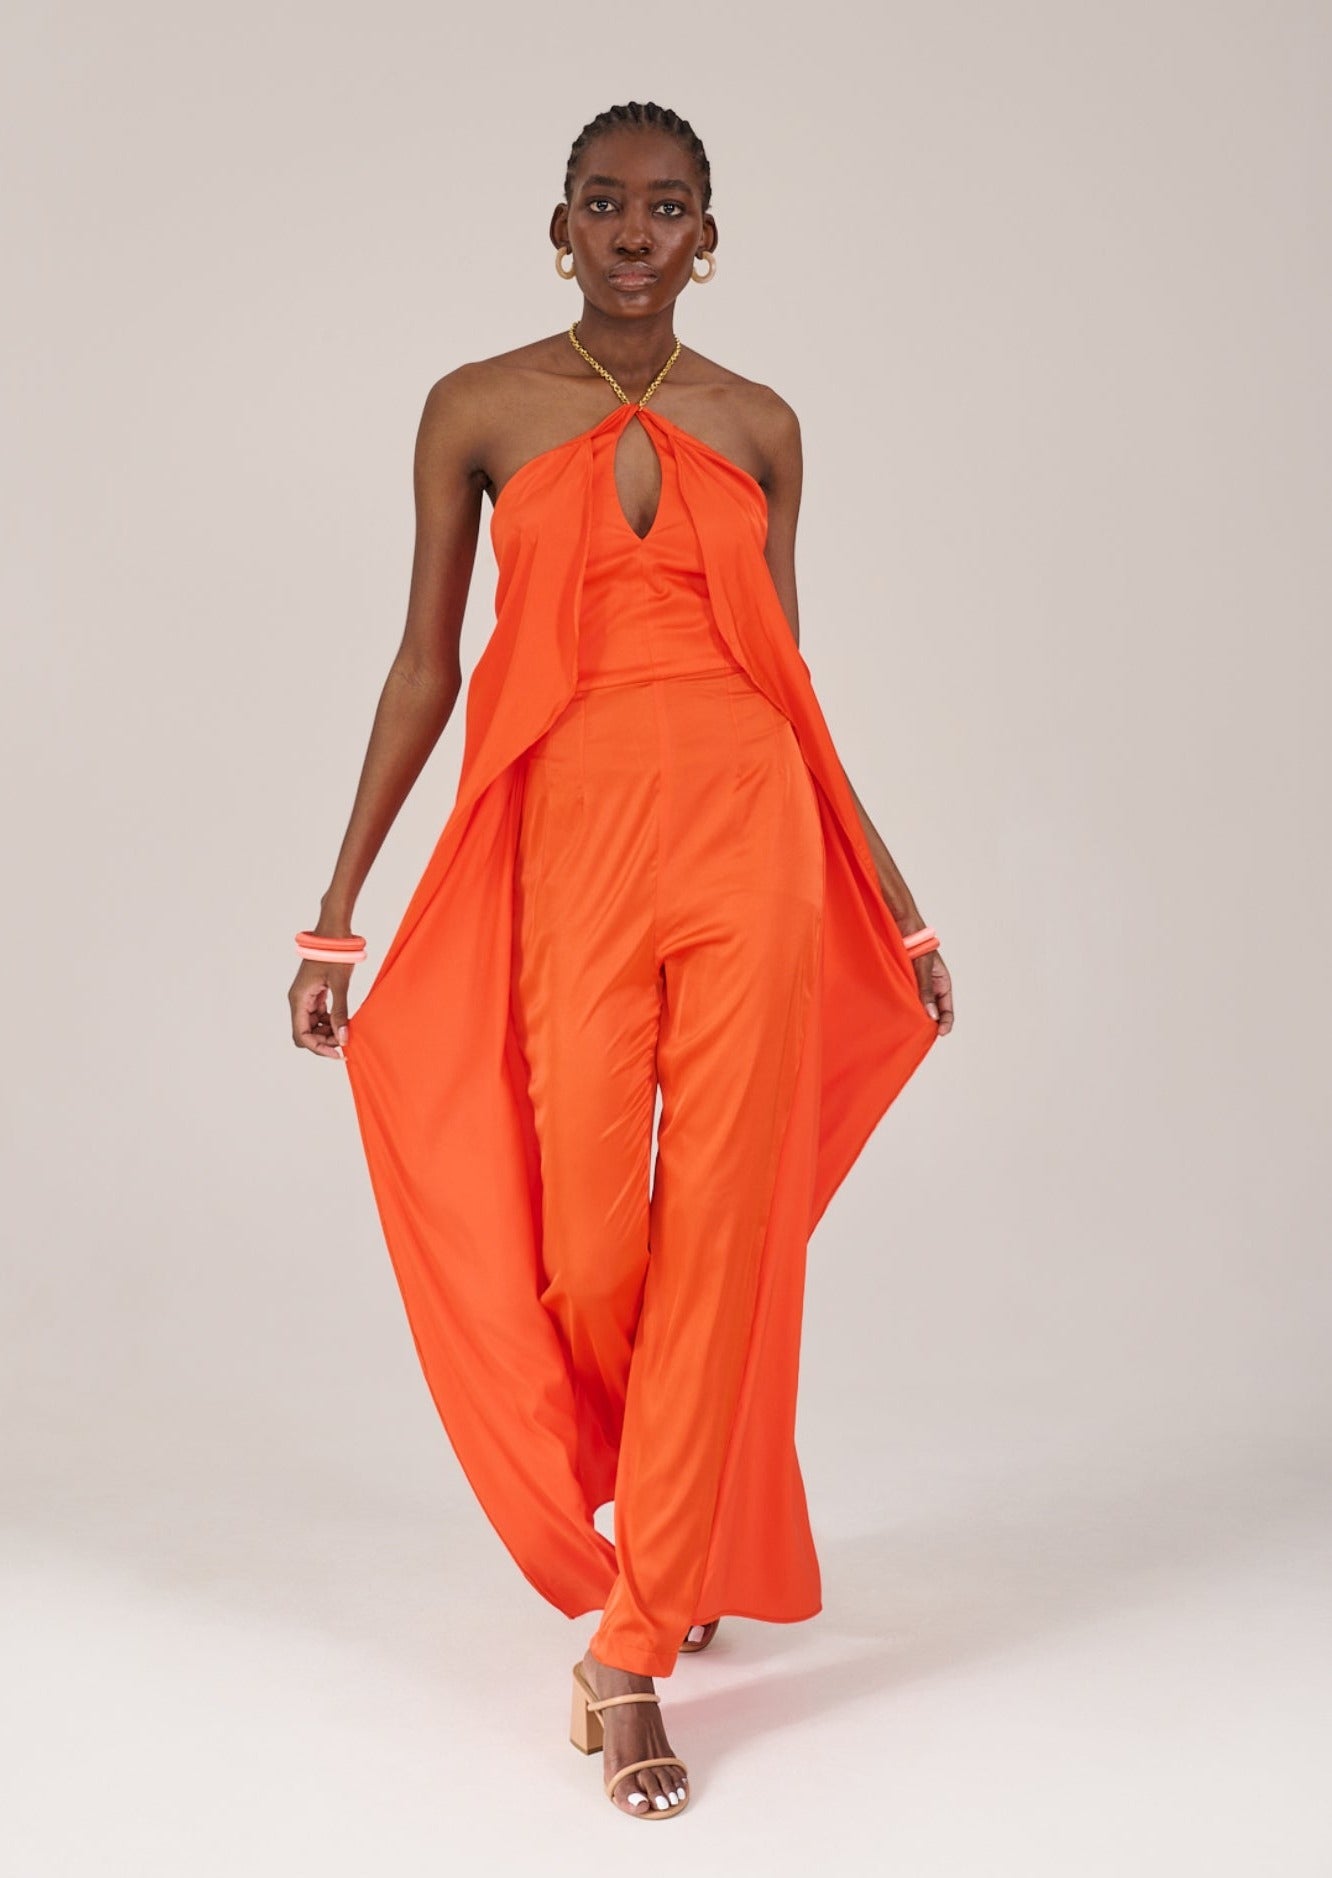 Model wearing the KAHINDO Imizamo Jumpsuit, walking forward lightly holding the fabric of the trousers